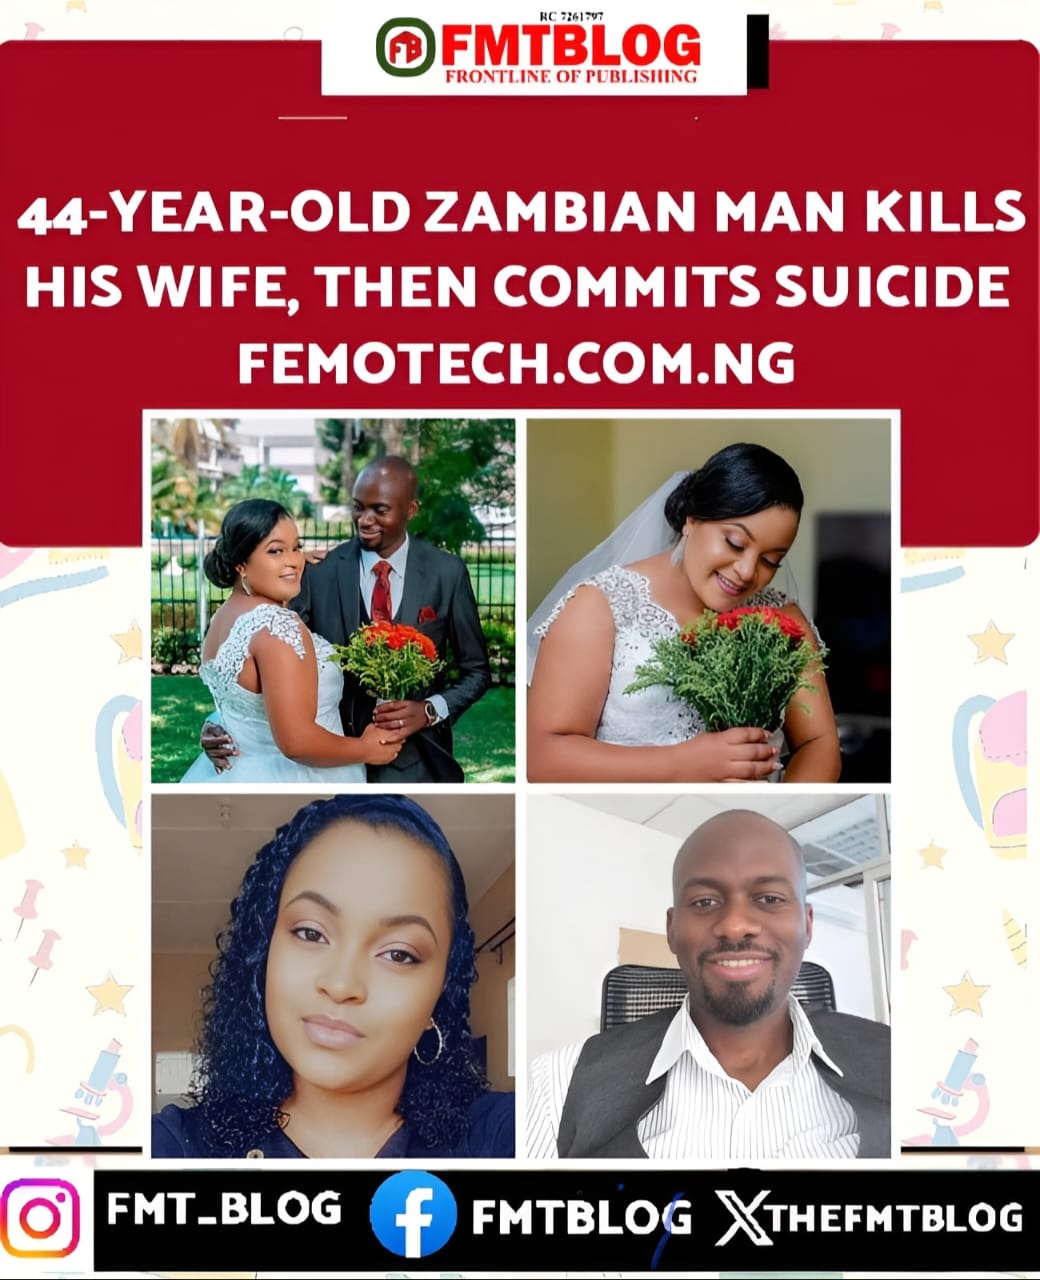 44-Year-Old Zambian Man Kills His Wife Then Commits Suicide